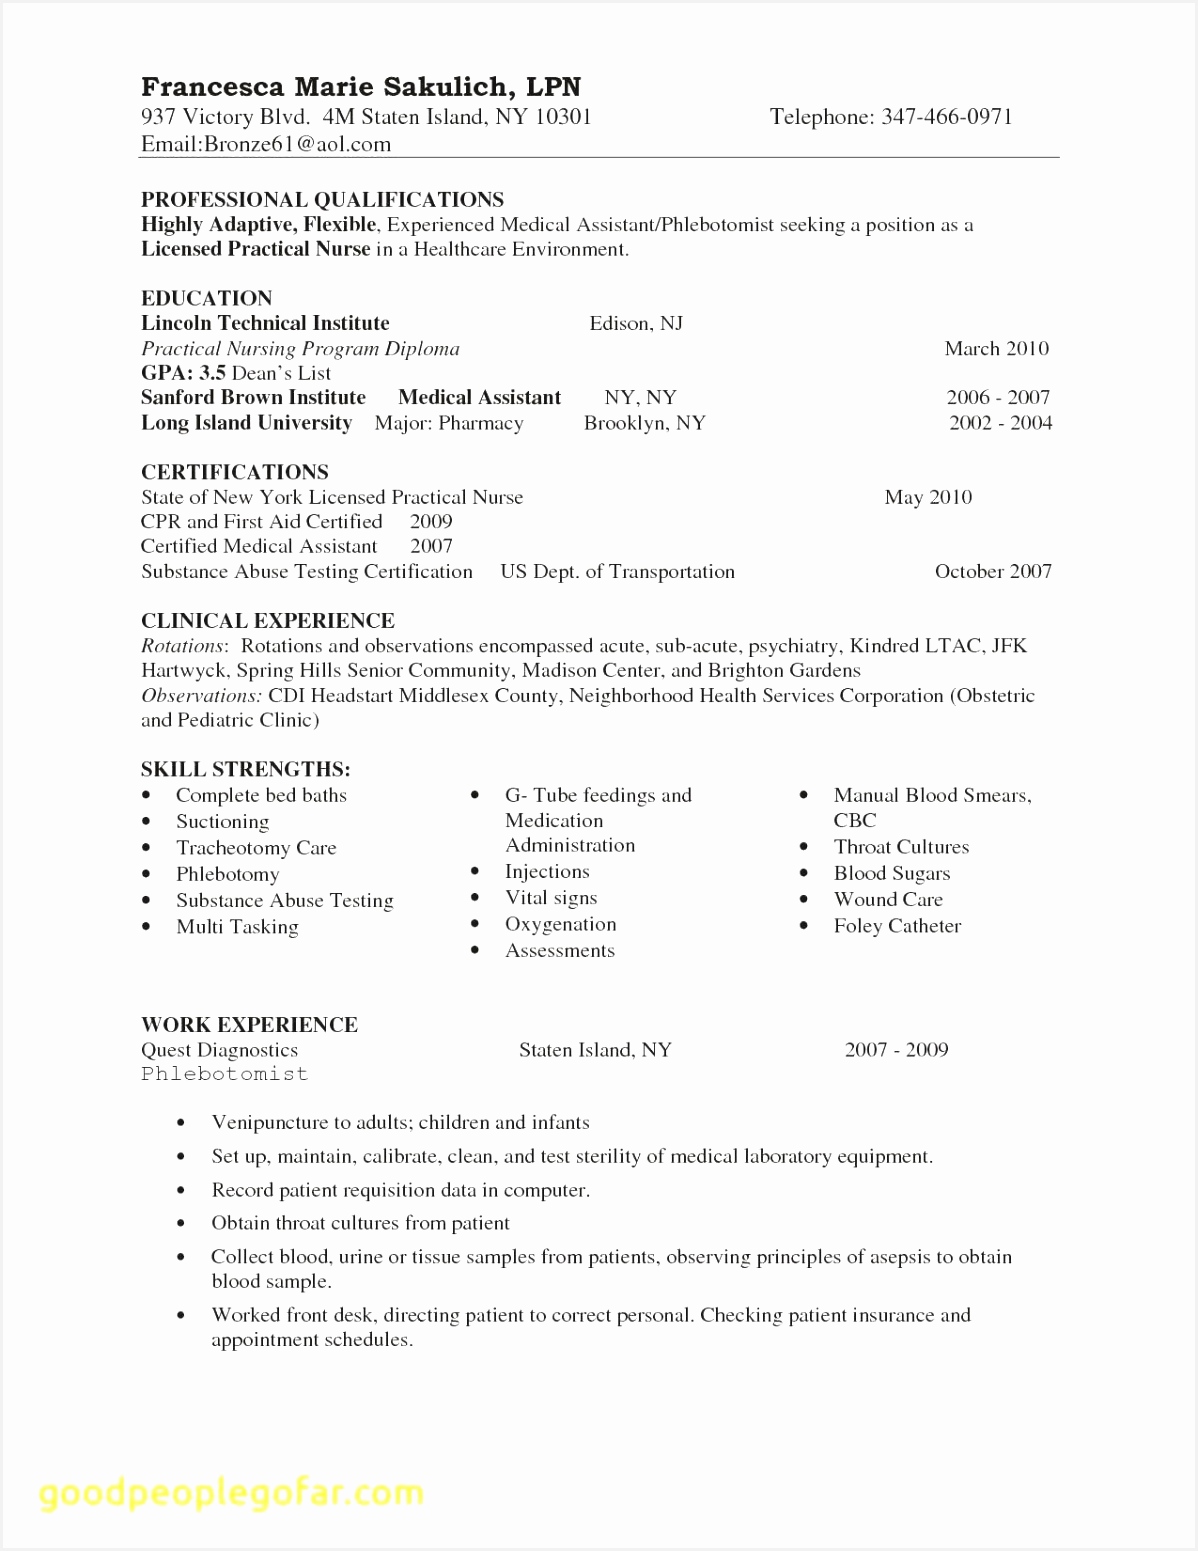 Caregiver Resume Sample for Elderly with Resume Skills and Abilities Beautiful Resume Examples 0d Skills 15511198jkCRg